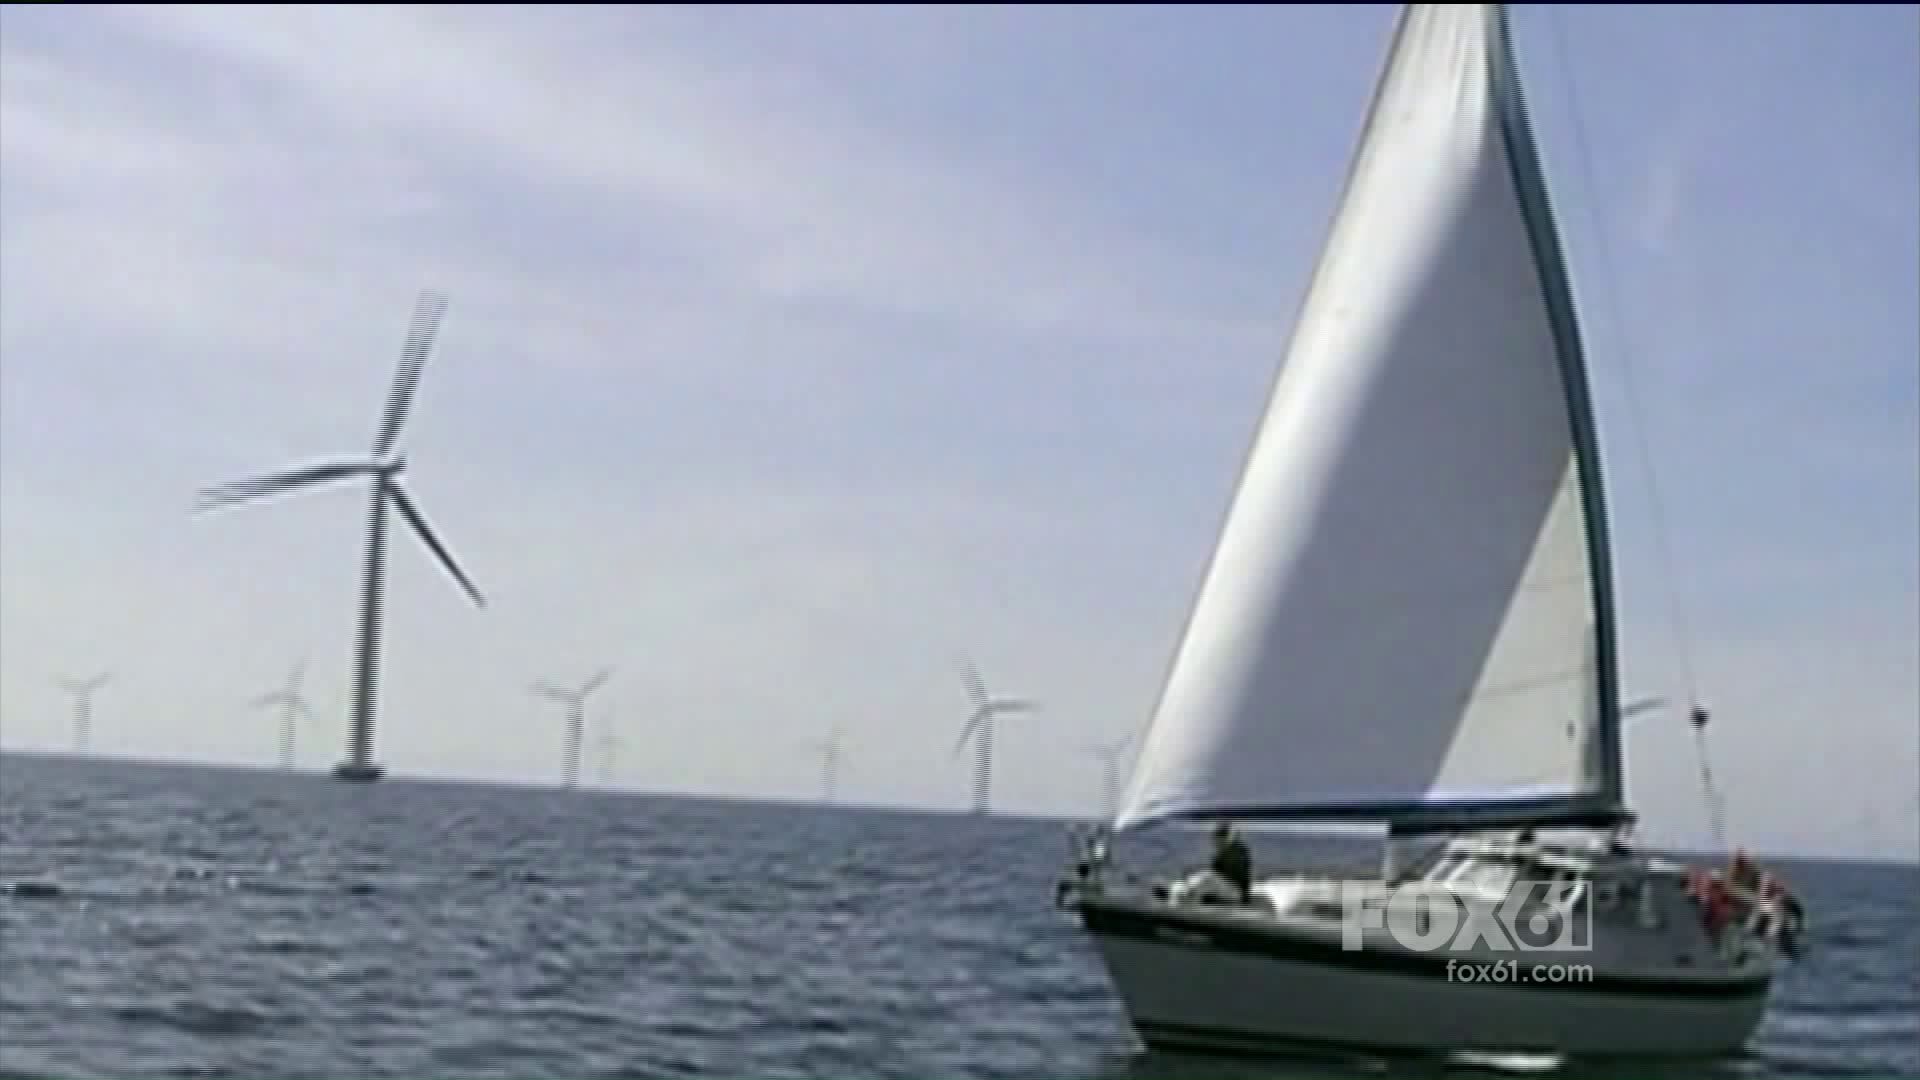 Real Story pt 2 -CT Port Authority - wind power